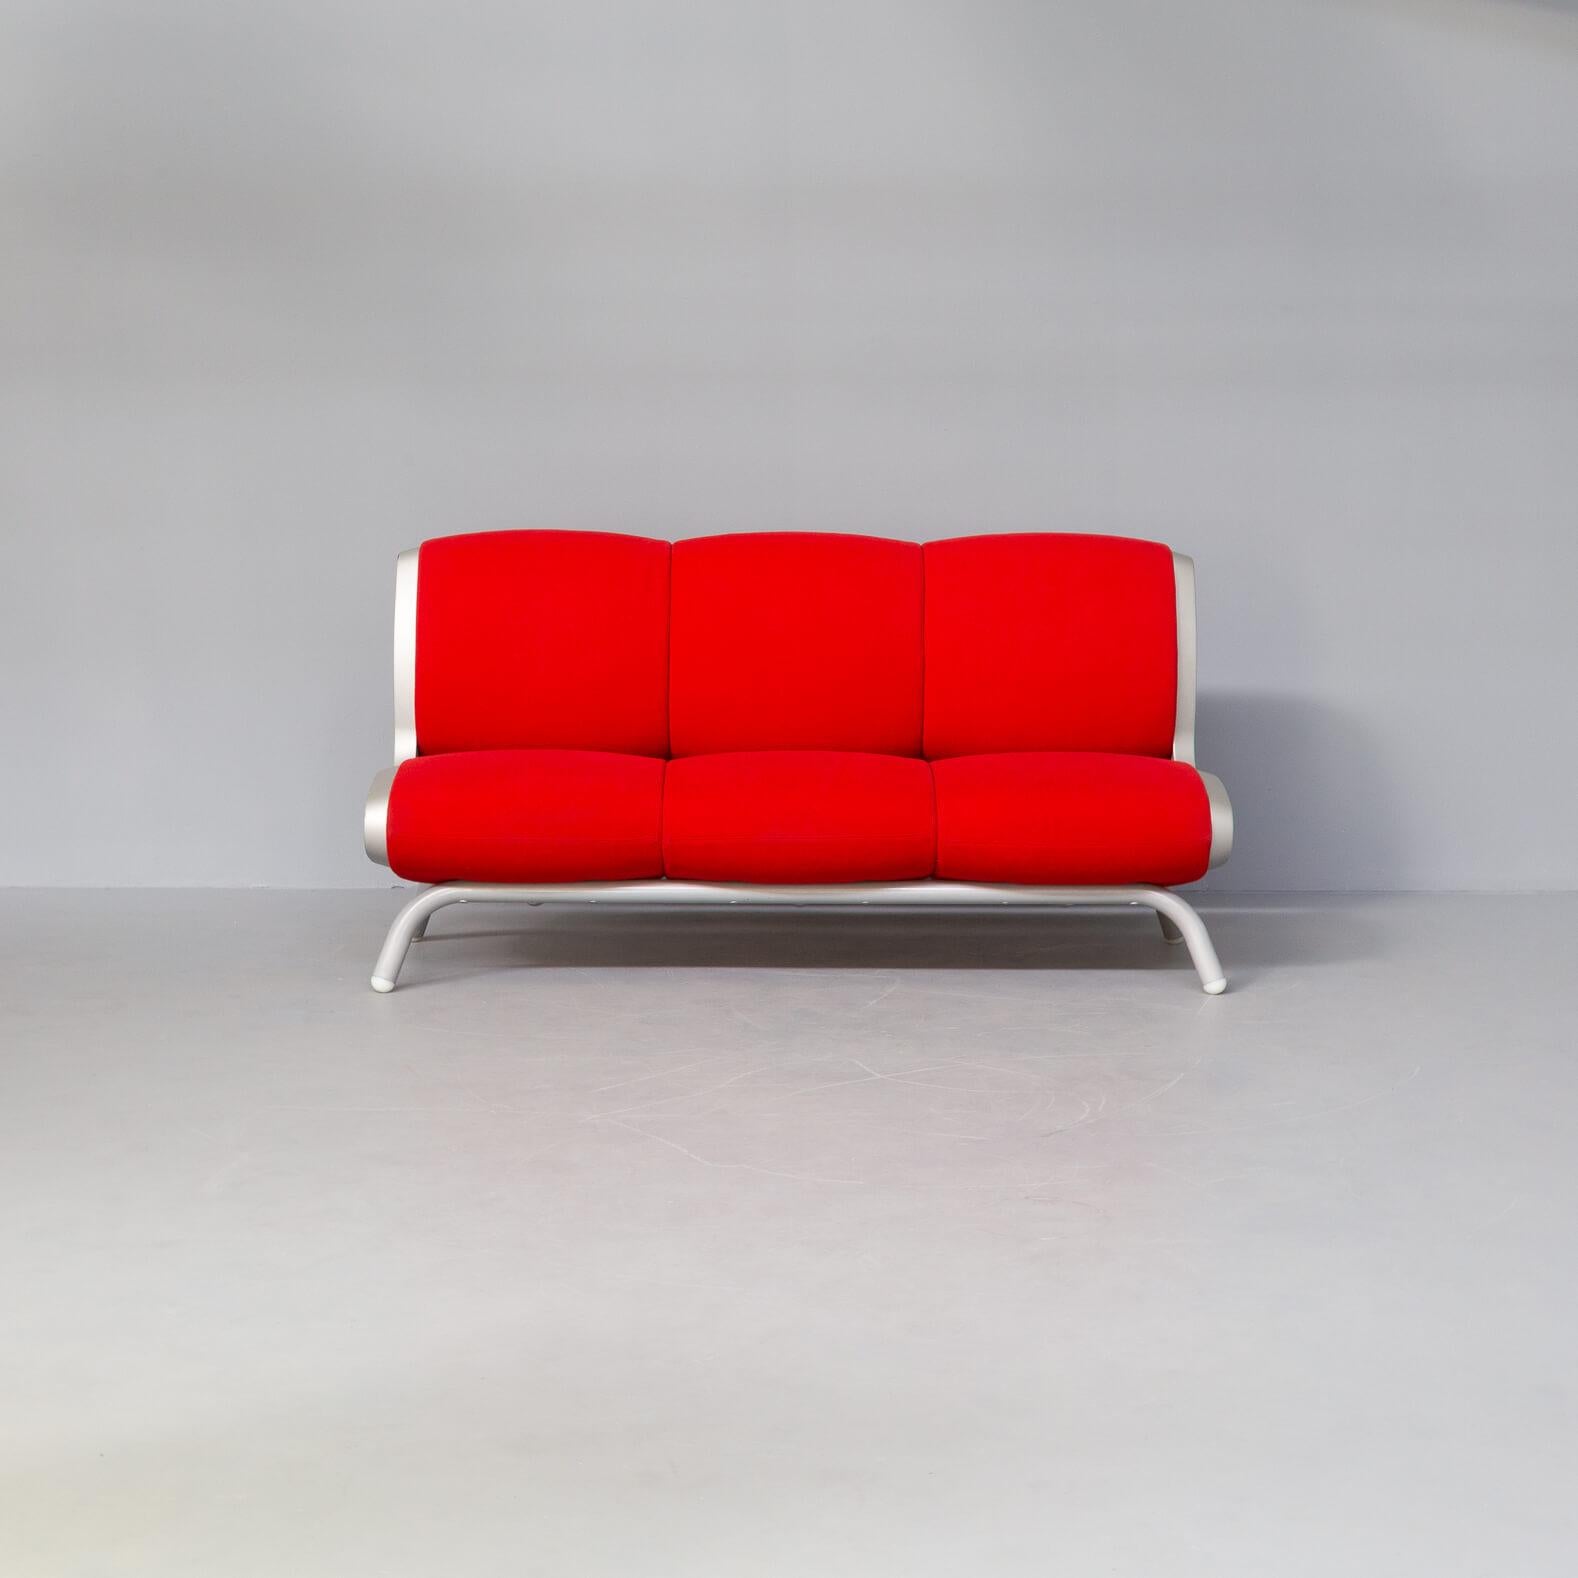 The impressive ‘Gluon’ sofa has a lacquered steel and firm frame with rounded feet. This sofa has the beautiful rounded frame with firm and comfortable seating. The void in the center acts as an air cushion to make it comfortable to sit on; the hole